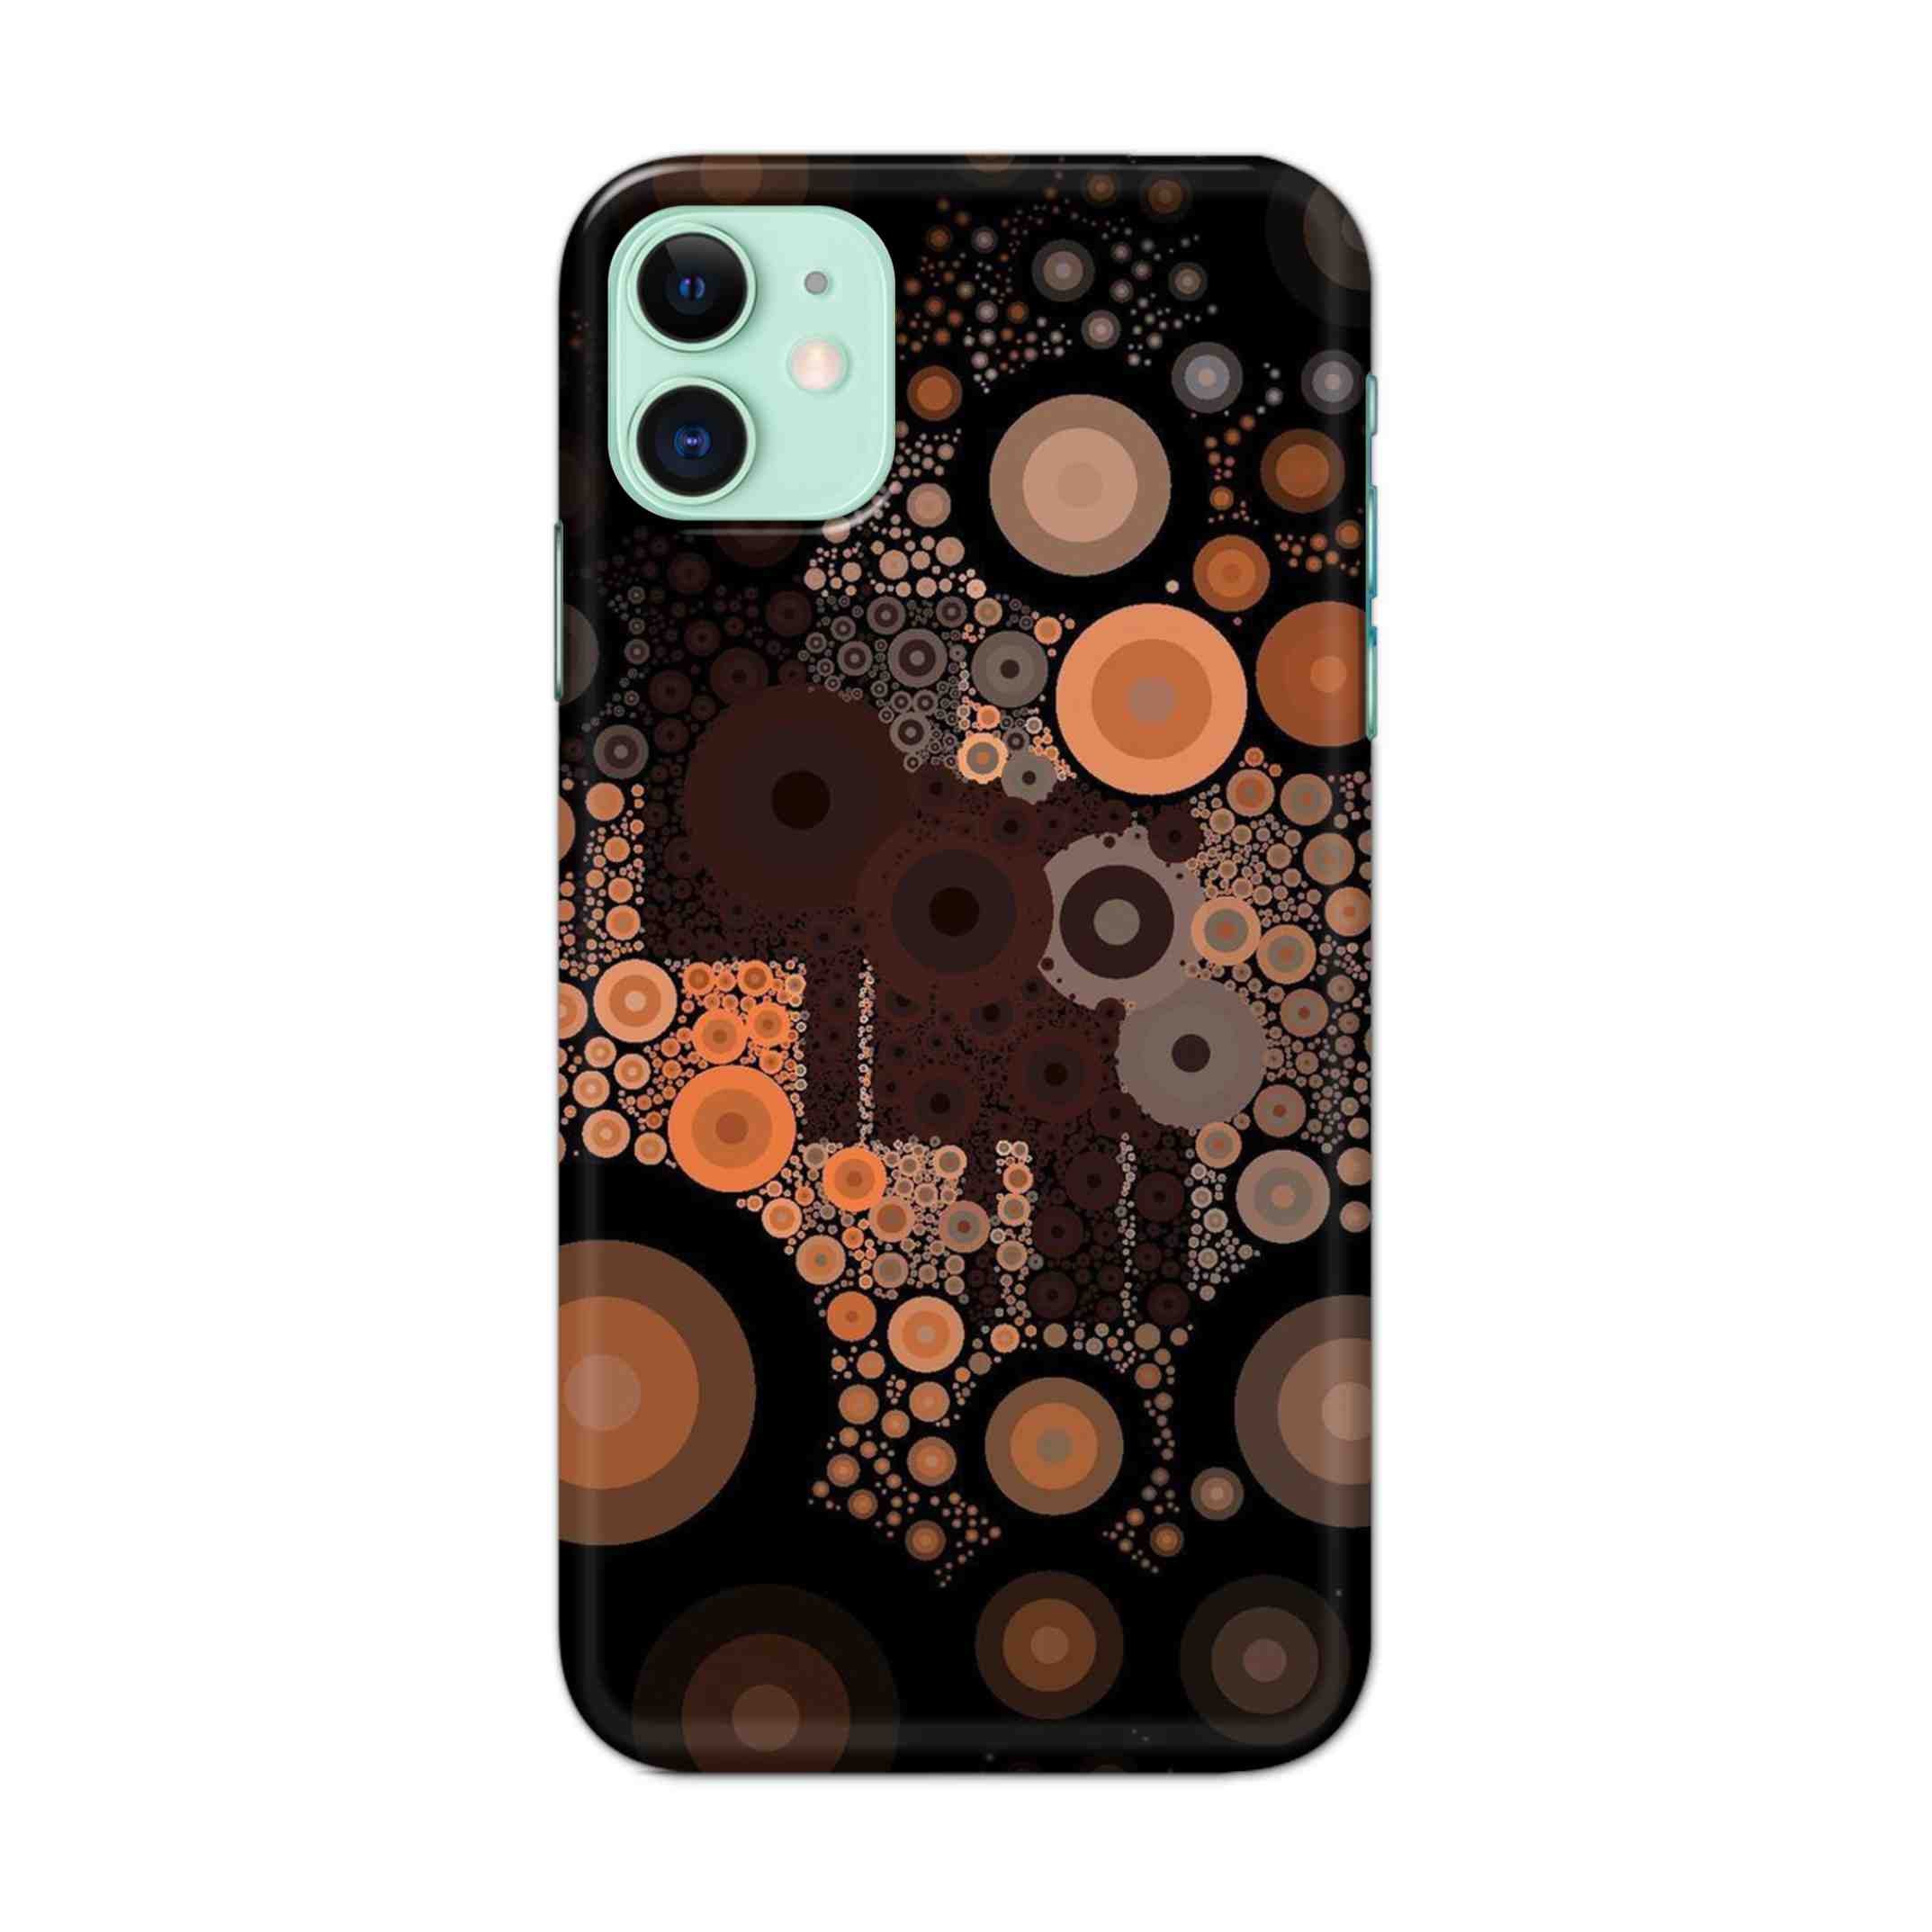 Buy Golden Circle Hard Back Mobile Phone Case/Cover For iPhone 11 Online